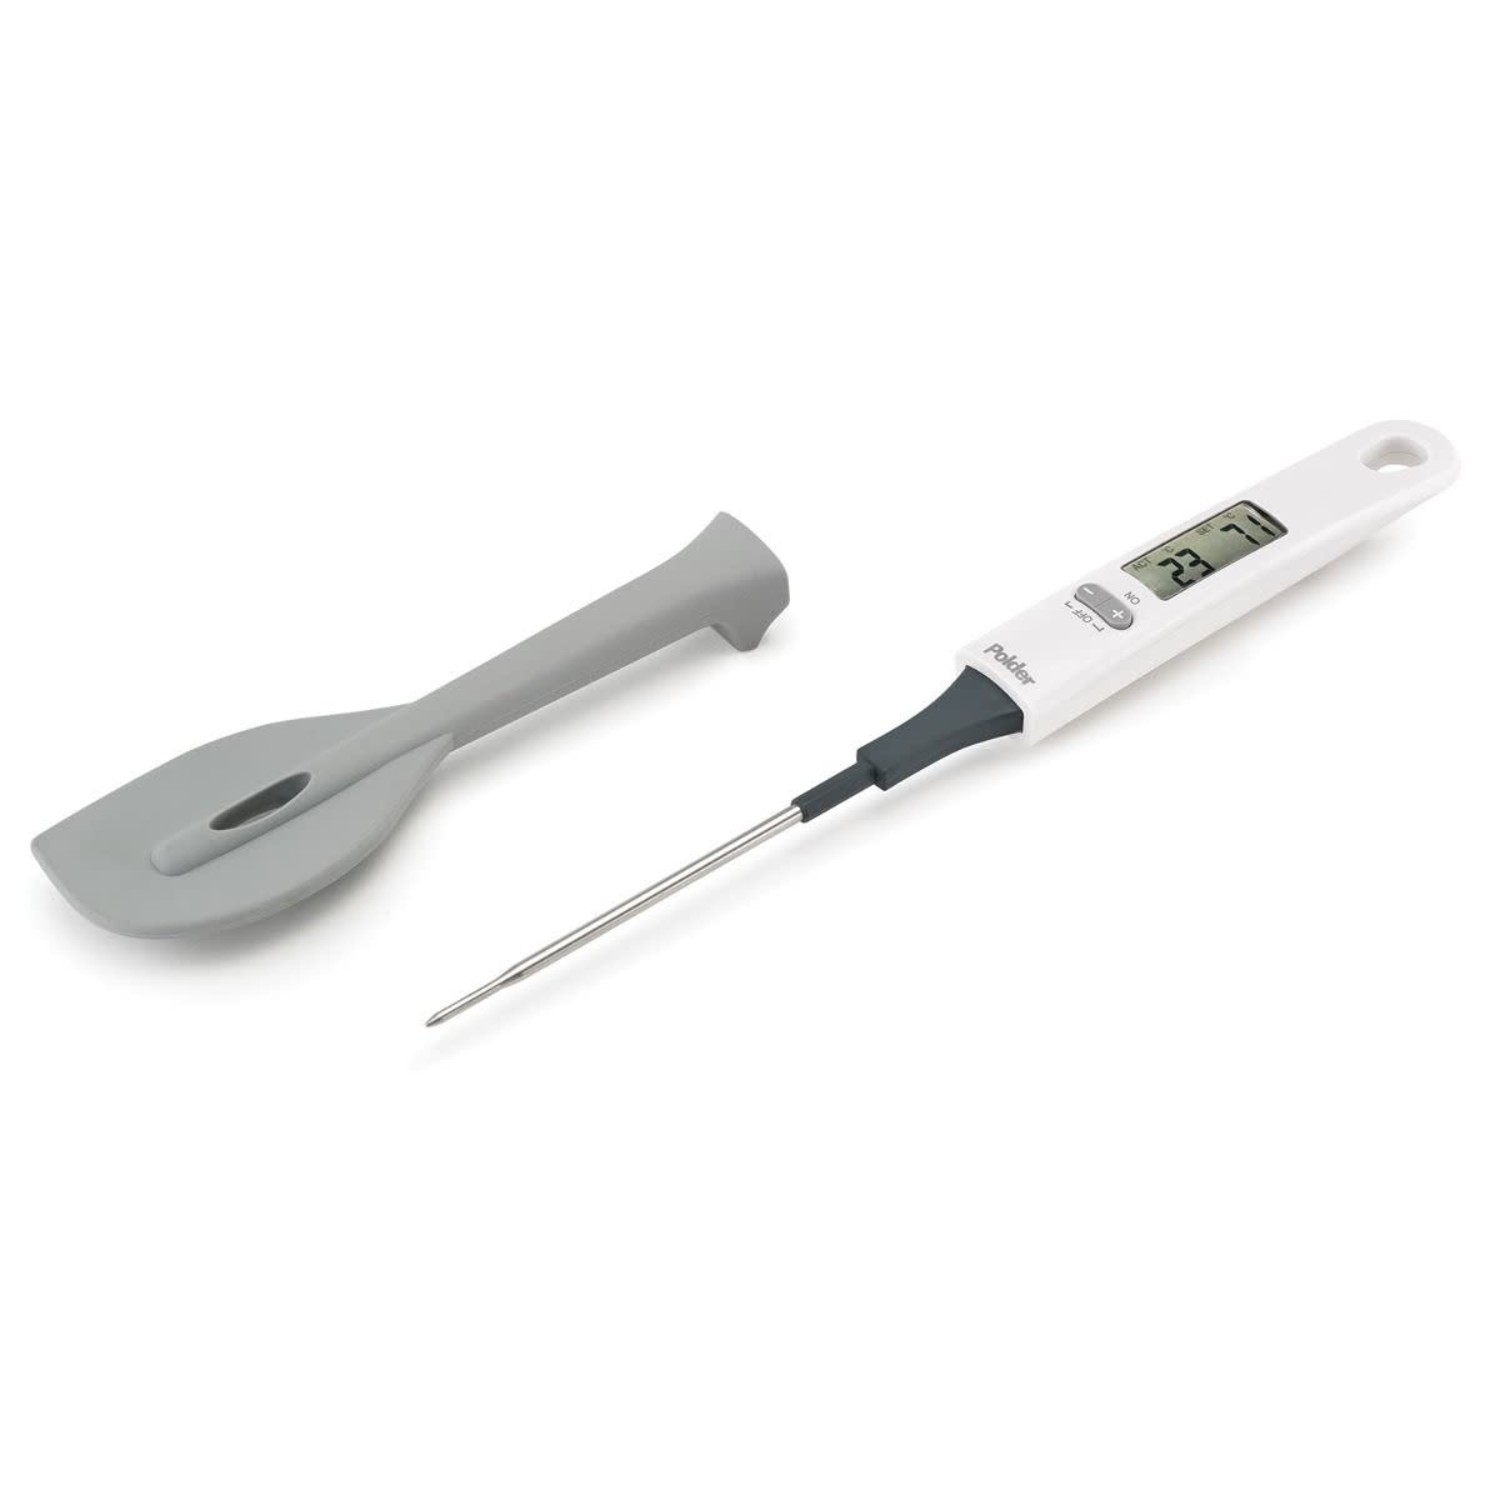 Cooking and Candy Spatula Thermometer Instant Read Digital Thermometer for  Chocolate, Creams, Sauces, Jams and Syrups